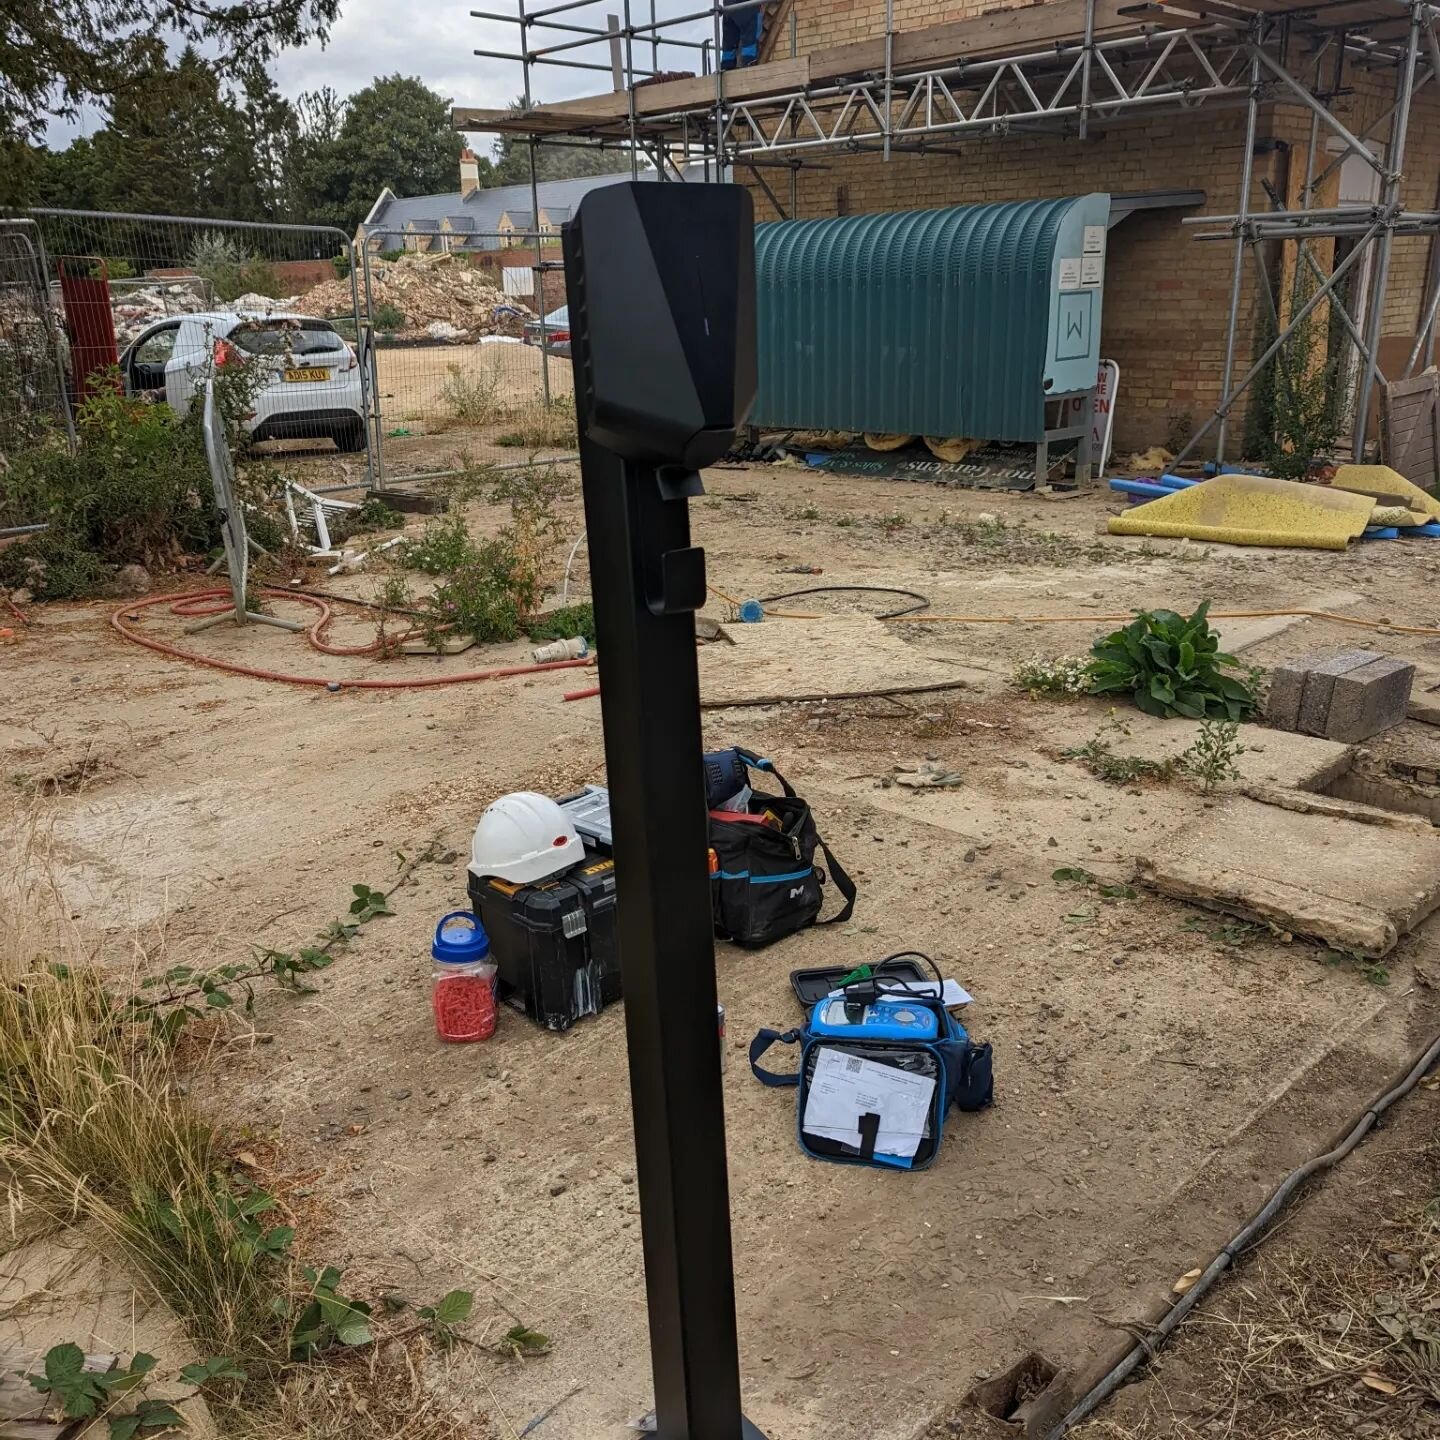 Temporary @easee_uk installation on a new site in Brampton, Cambridgeshire. The site will eventually have a charger for each apartment. #evcharging #electriccar #propertydevelopment #easeecharge